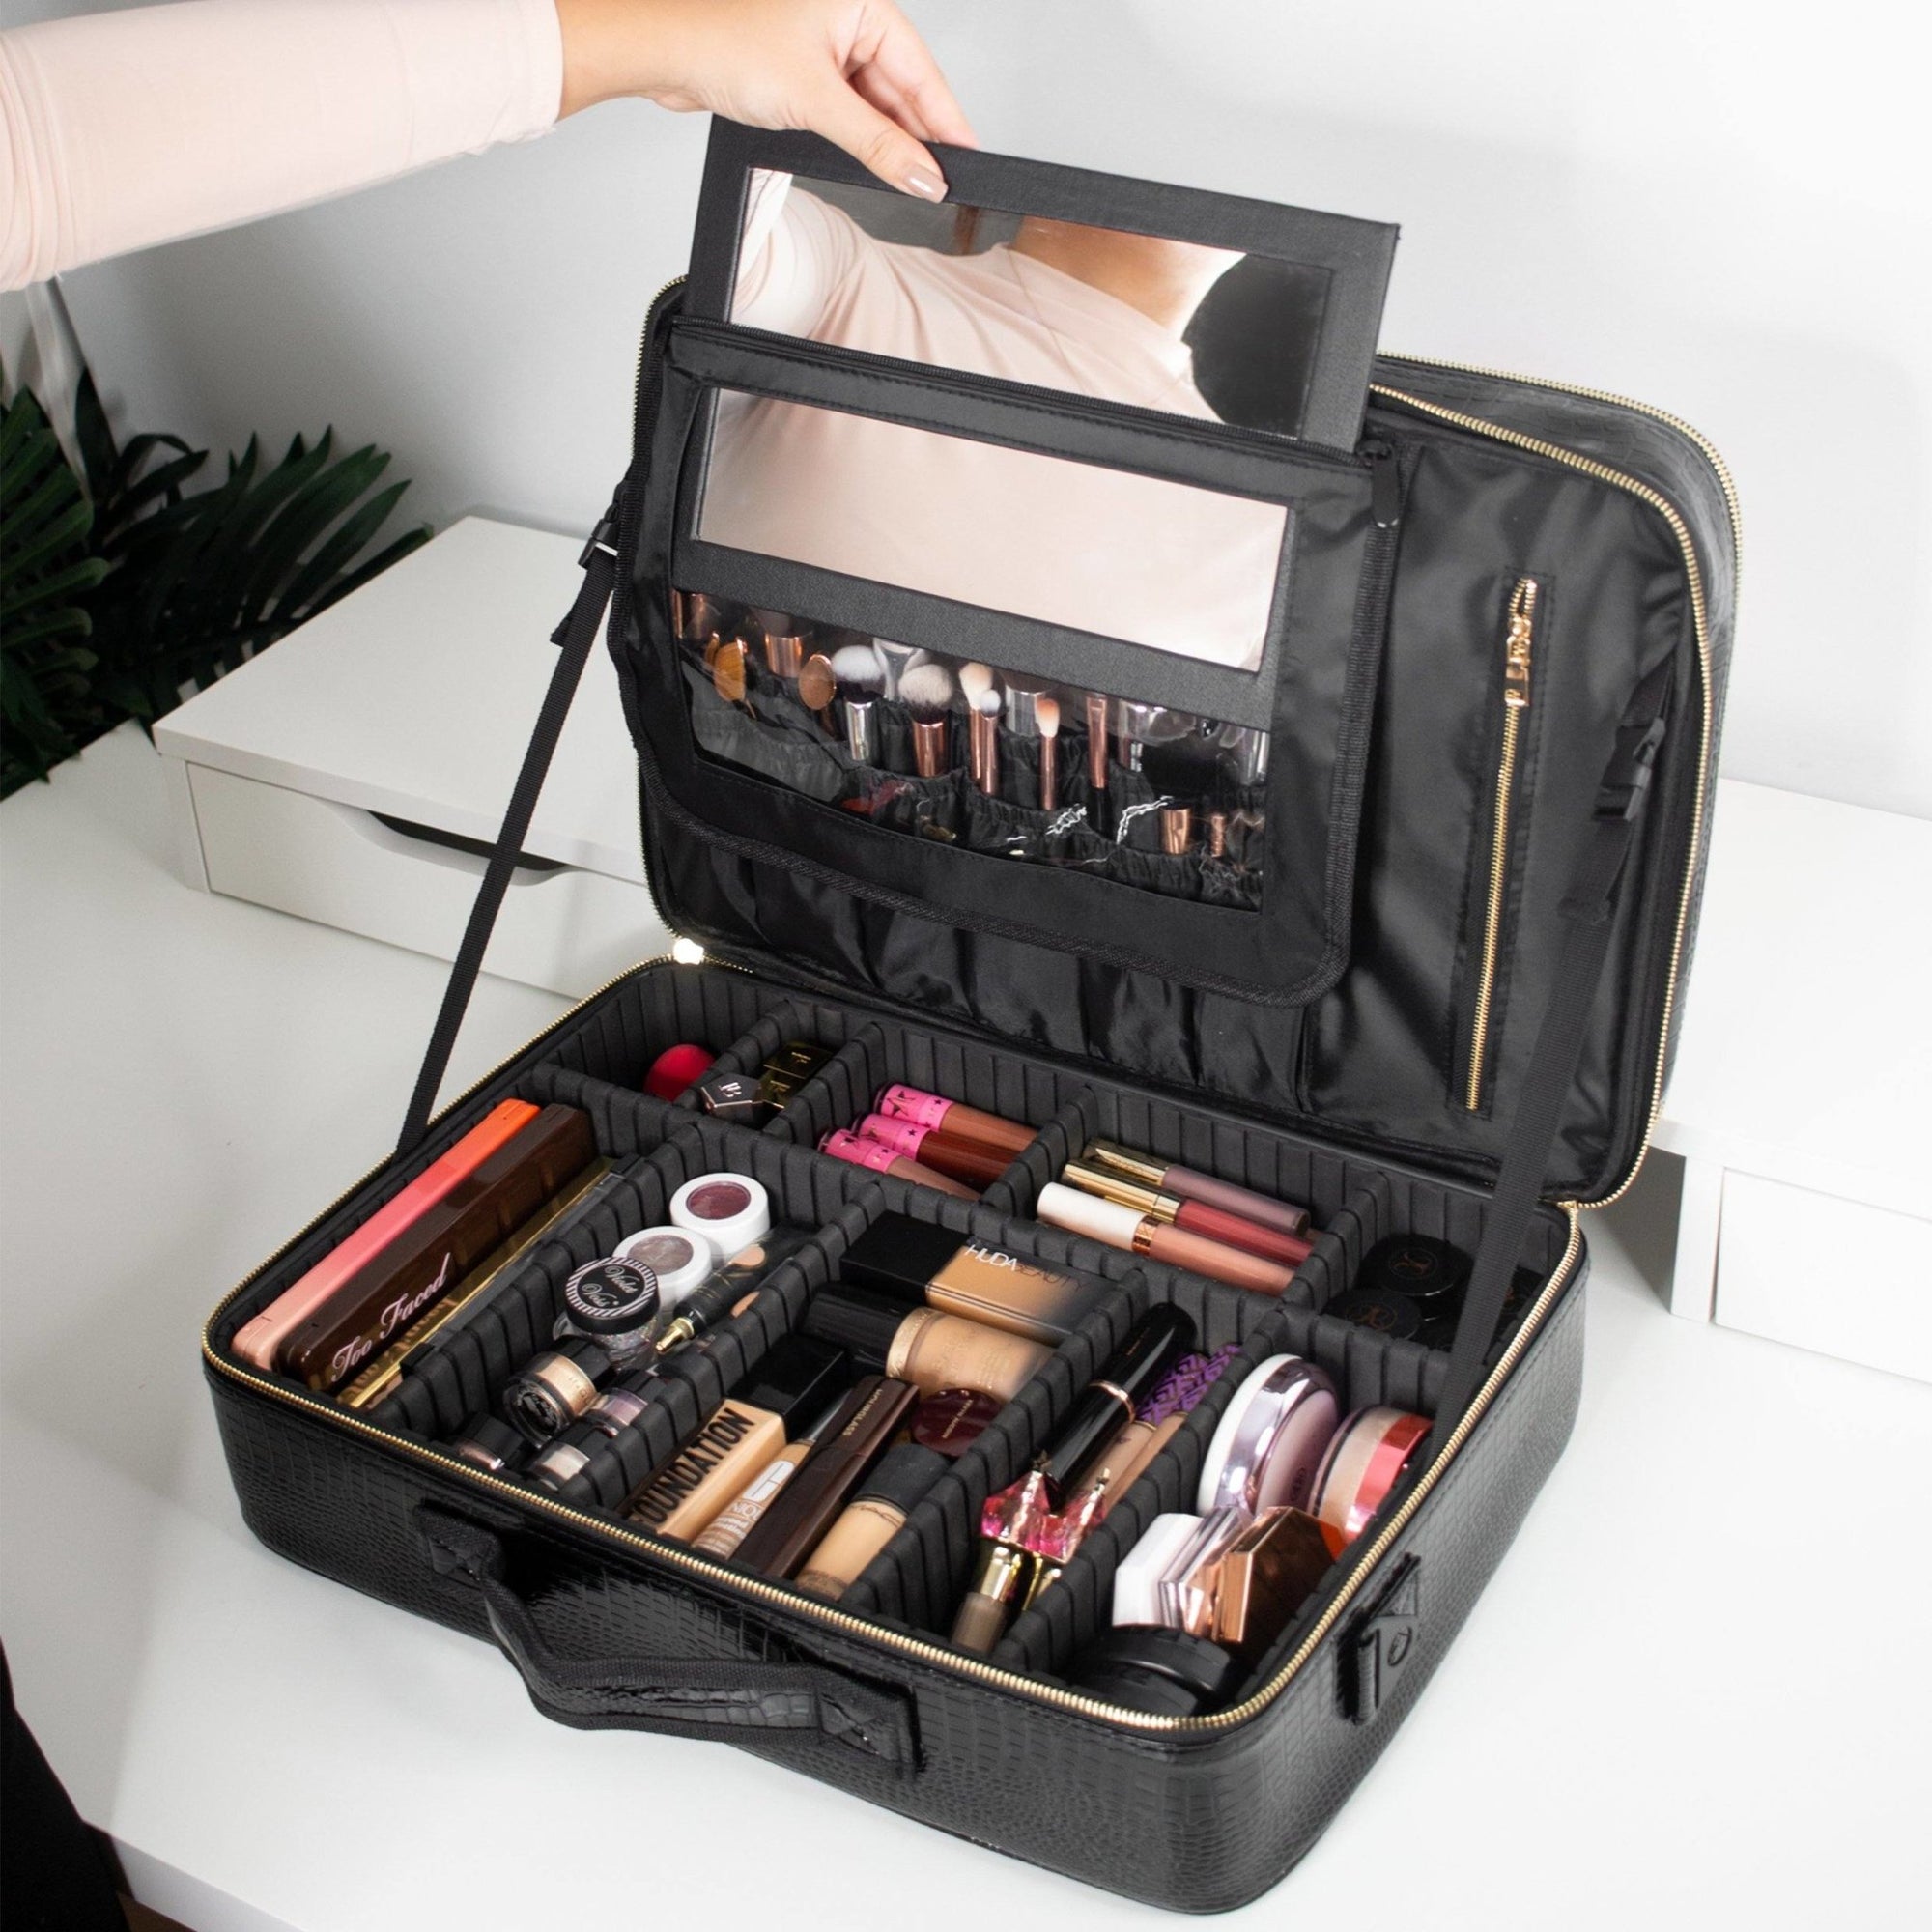 5 Things To Consider When Choosing A Makeup Case | Luvo Store